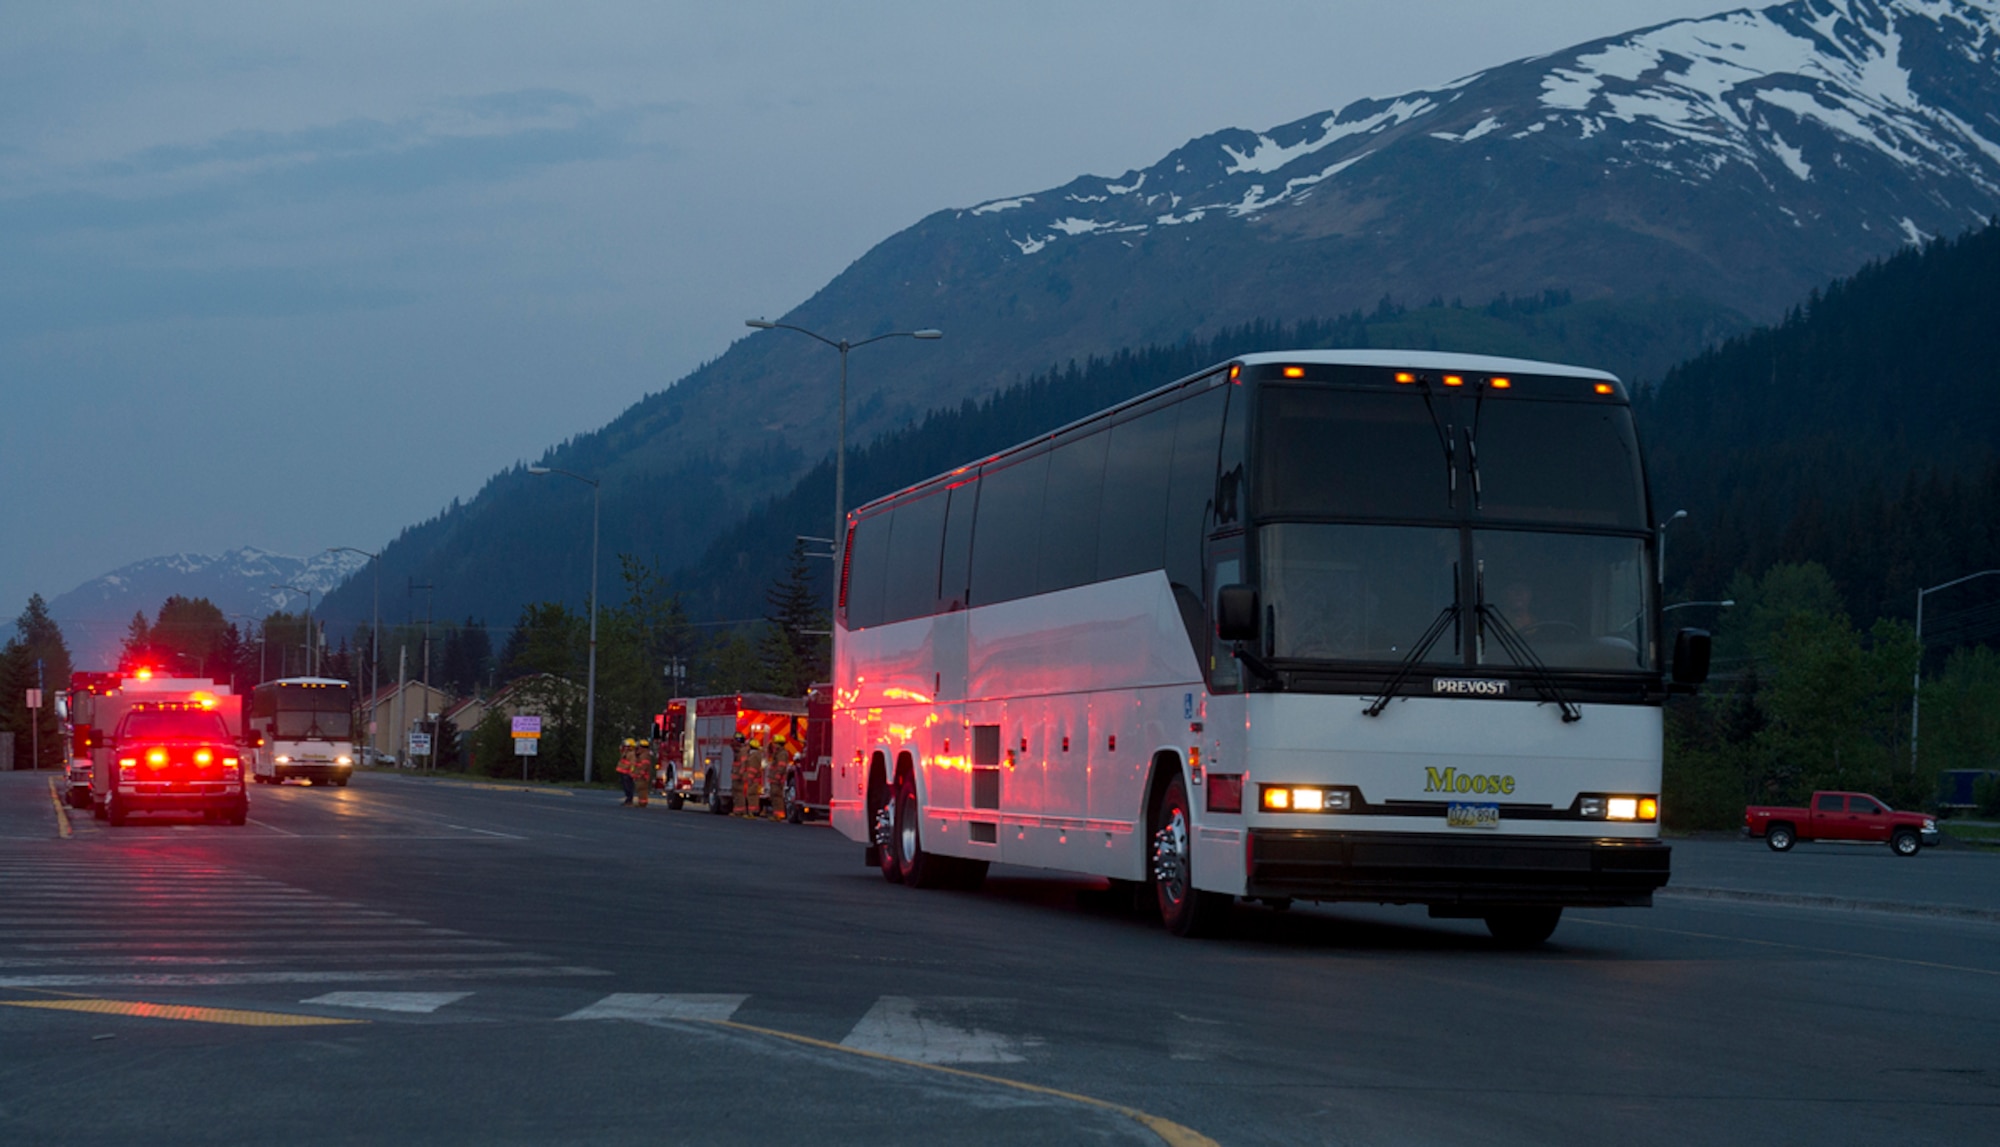 Buses carrying Joint Base Elmendorf-Richardson service members pull up to the docks at the start of the 8th Annual Armed Services Combat Fishing Tournament in Seward, Alaska, May 22, 2014. The local fire department flashed their lights as they waved to welcome these service members to Seward. (U.S. Air Force photo/Staff Sgt. Zachary Wolf)